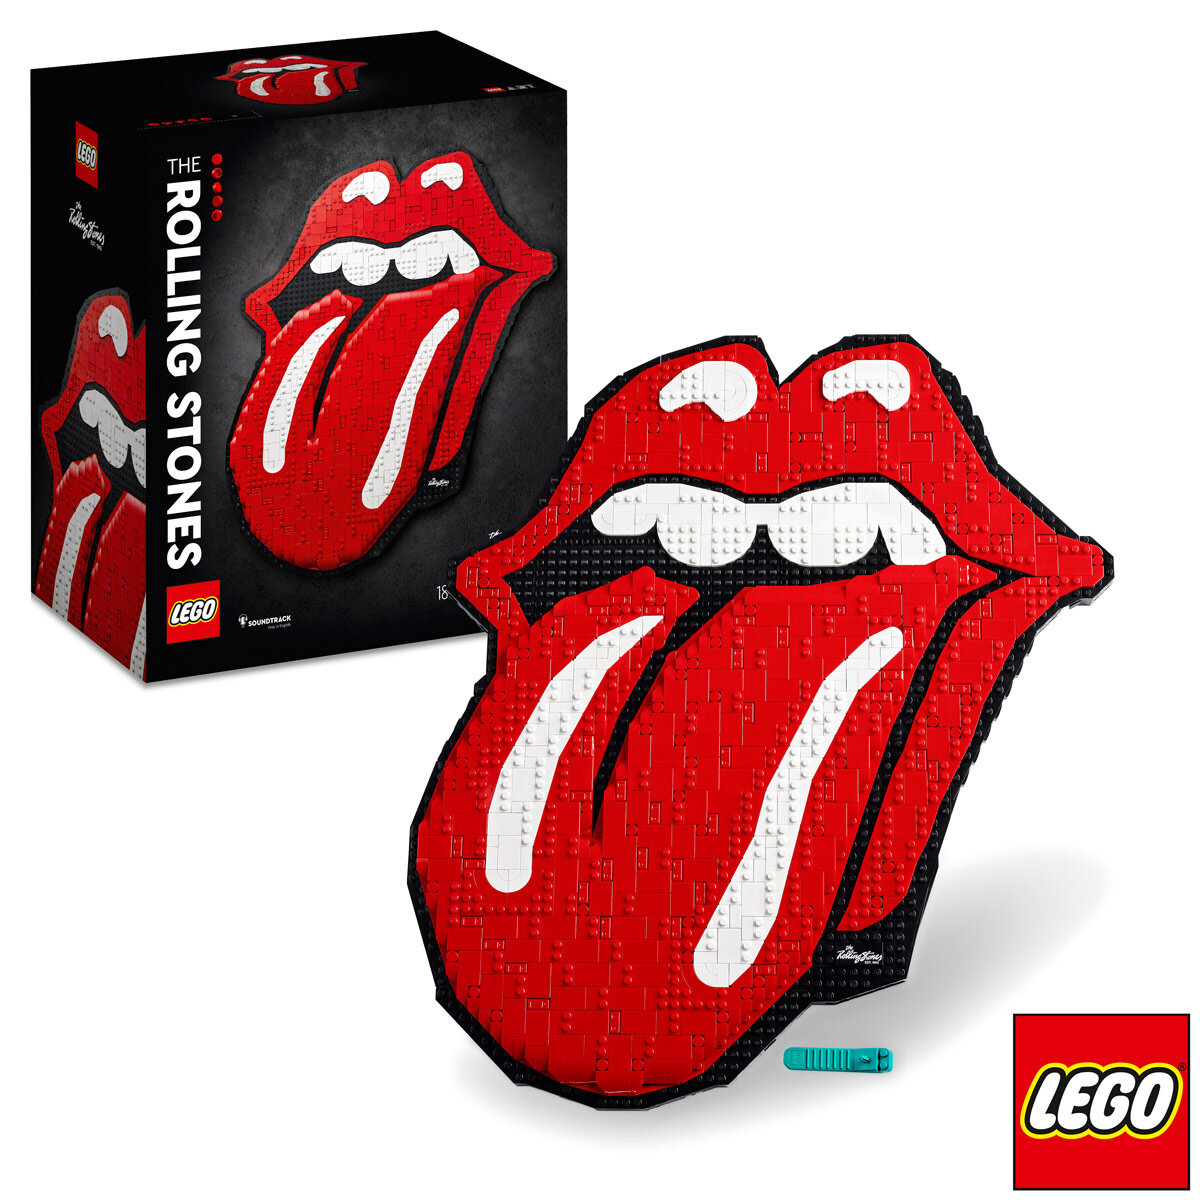 Buy LEGO ART The Rolling Stones Box & Items Image at Costco.co.uk